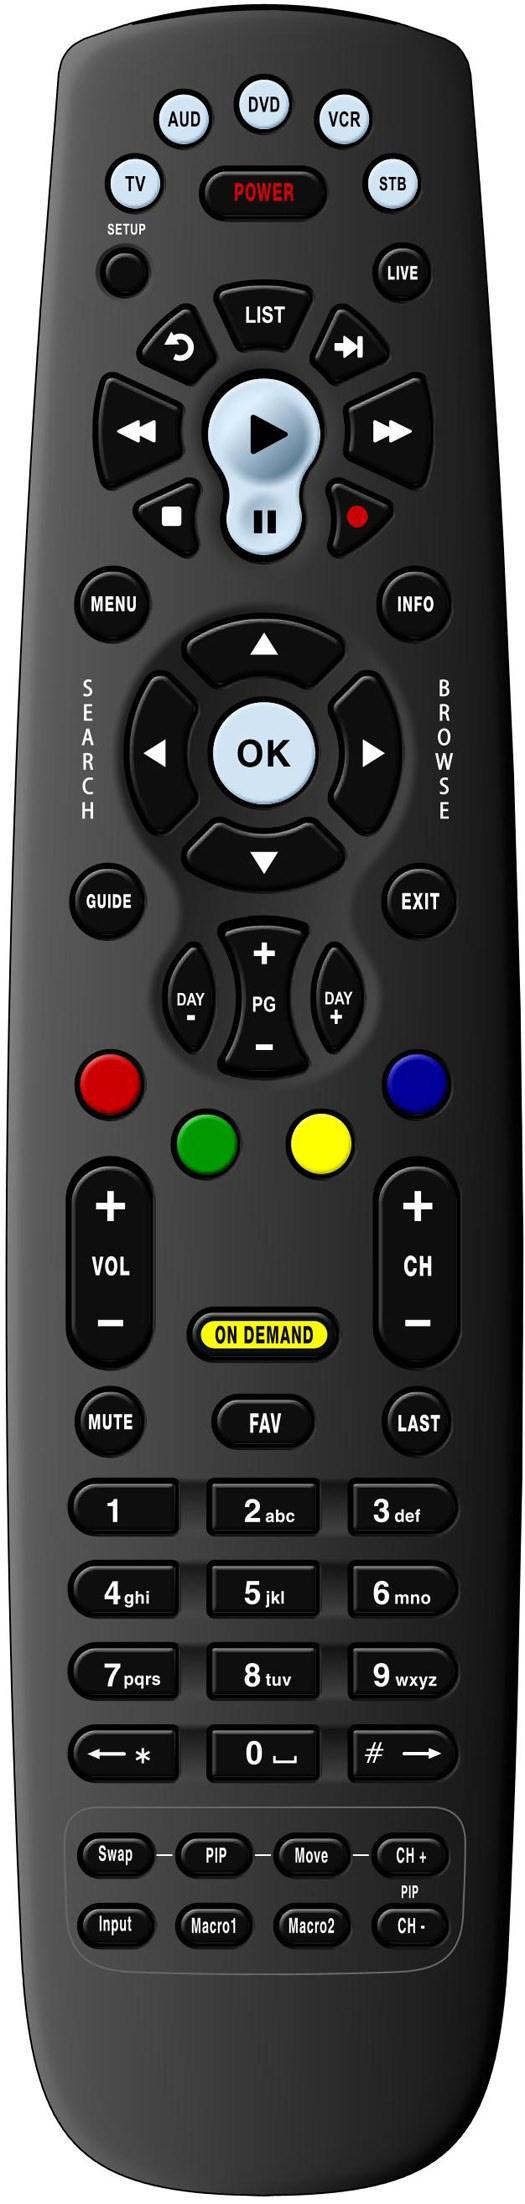 REMOTE QUICK GUIDE TV, AUD, DVD, VCR, STB Use one remote to control multiple devices. Setup Use for programming sequences of devices controlled by the remote.